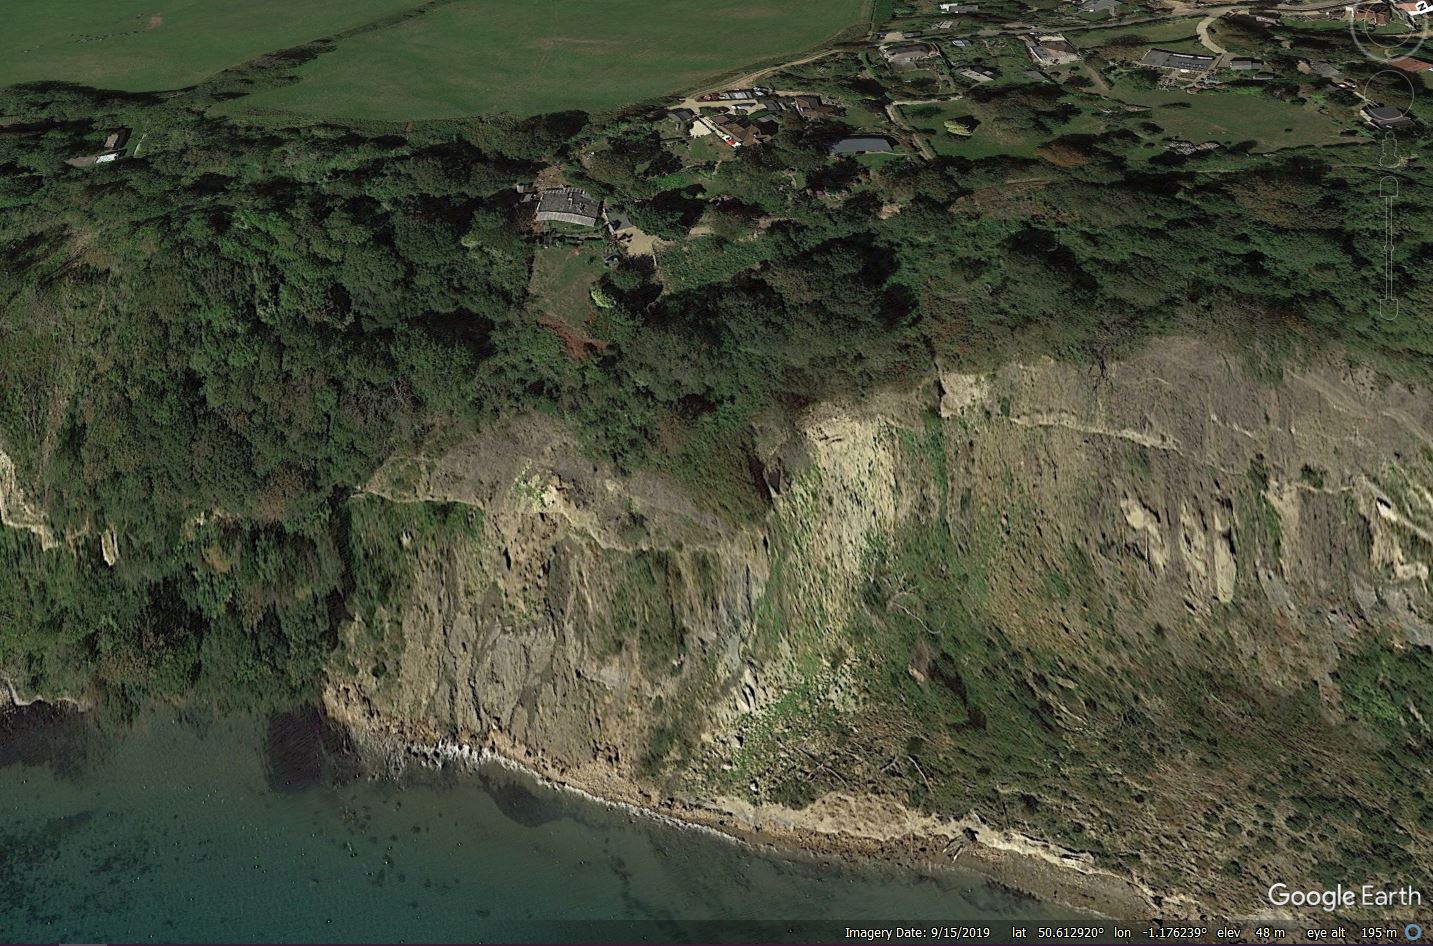 oogle Earth image of the site of the landslide at Luccombe on the Isle of Wight.